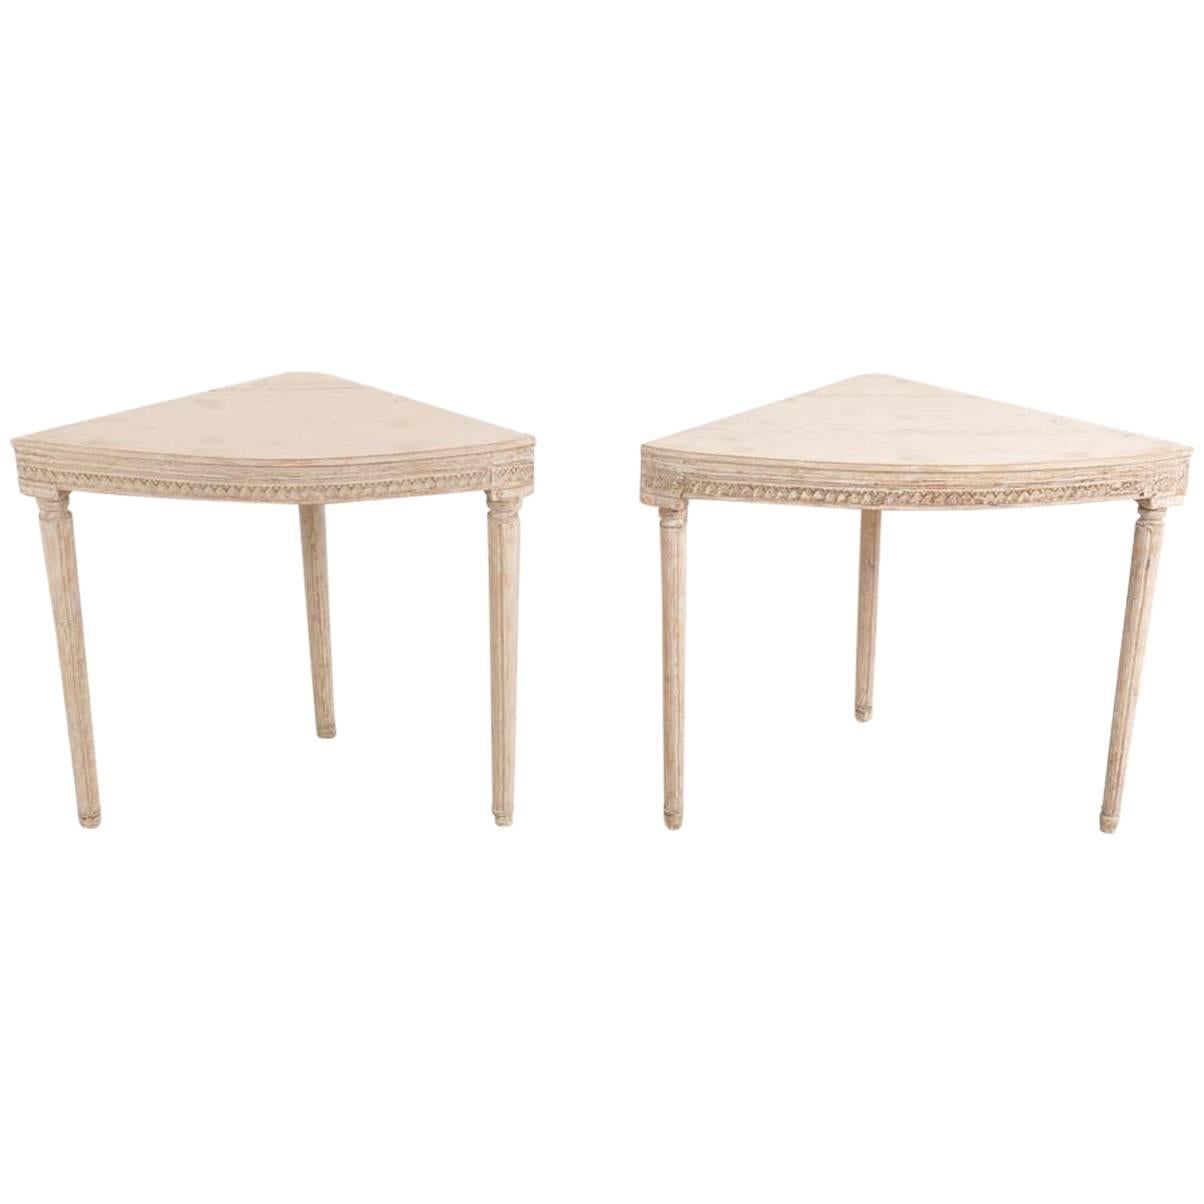 Pair of Swedish Gustavian Period Corner Tables For Sale